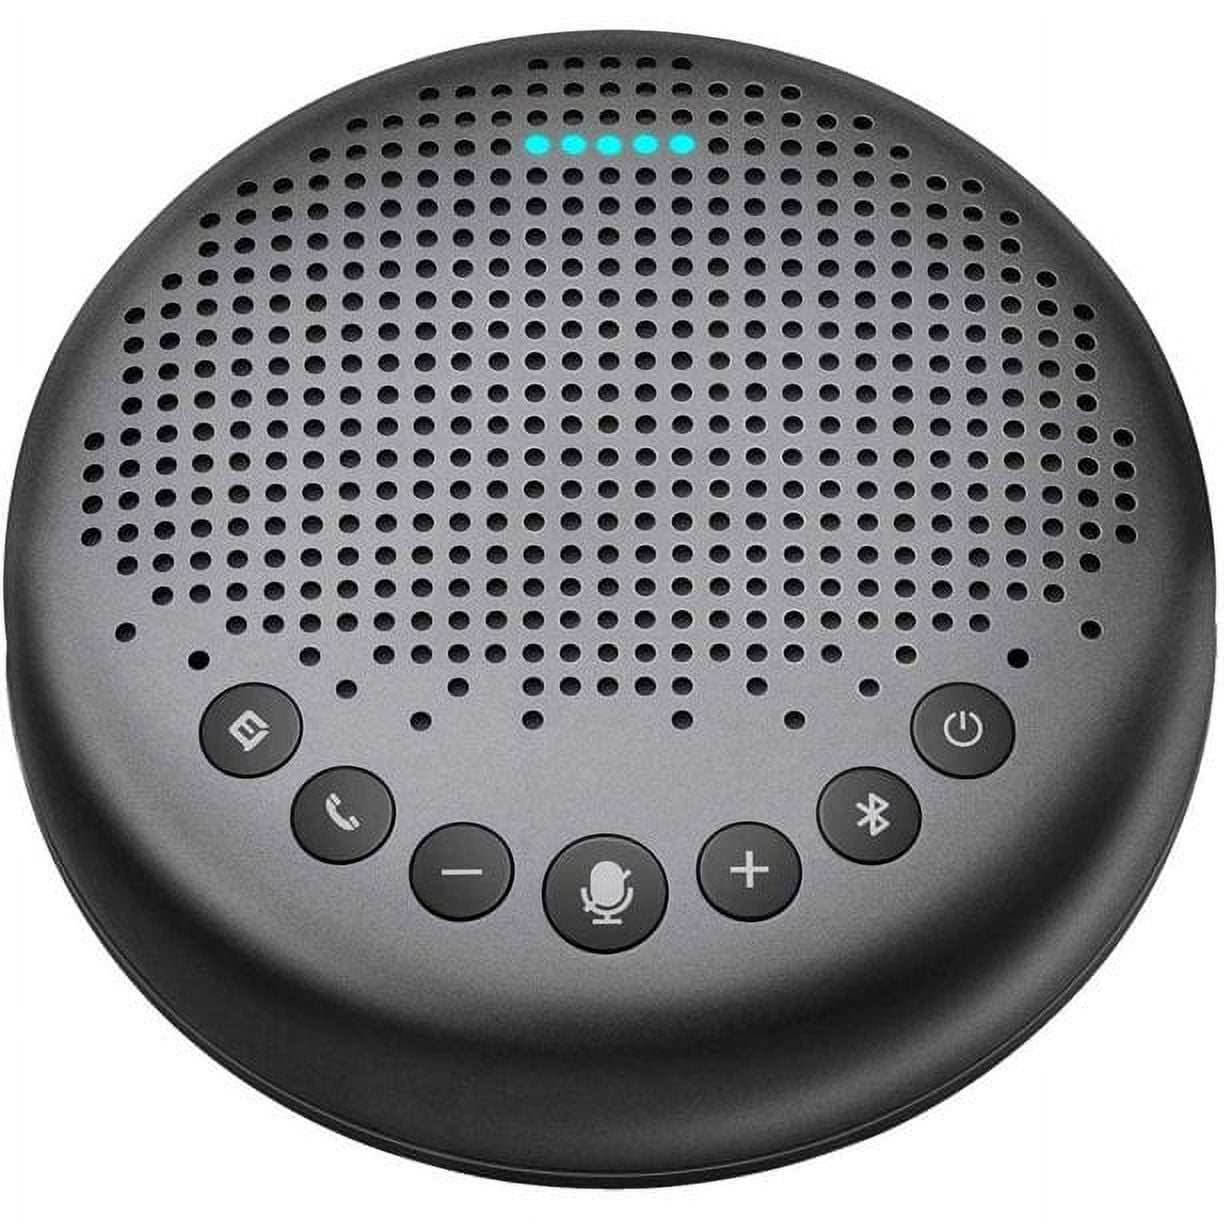 Reviewed: Conference Speaker and Microphone - EMEET Luna 360